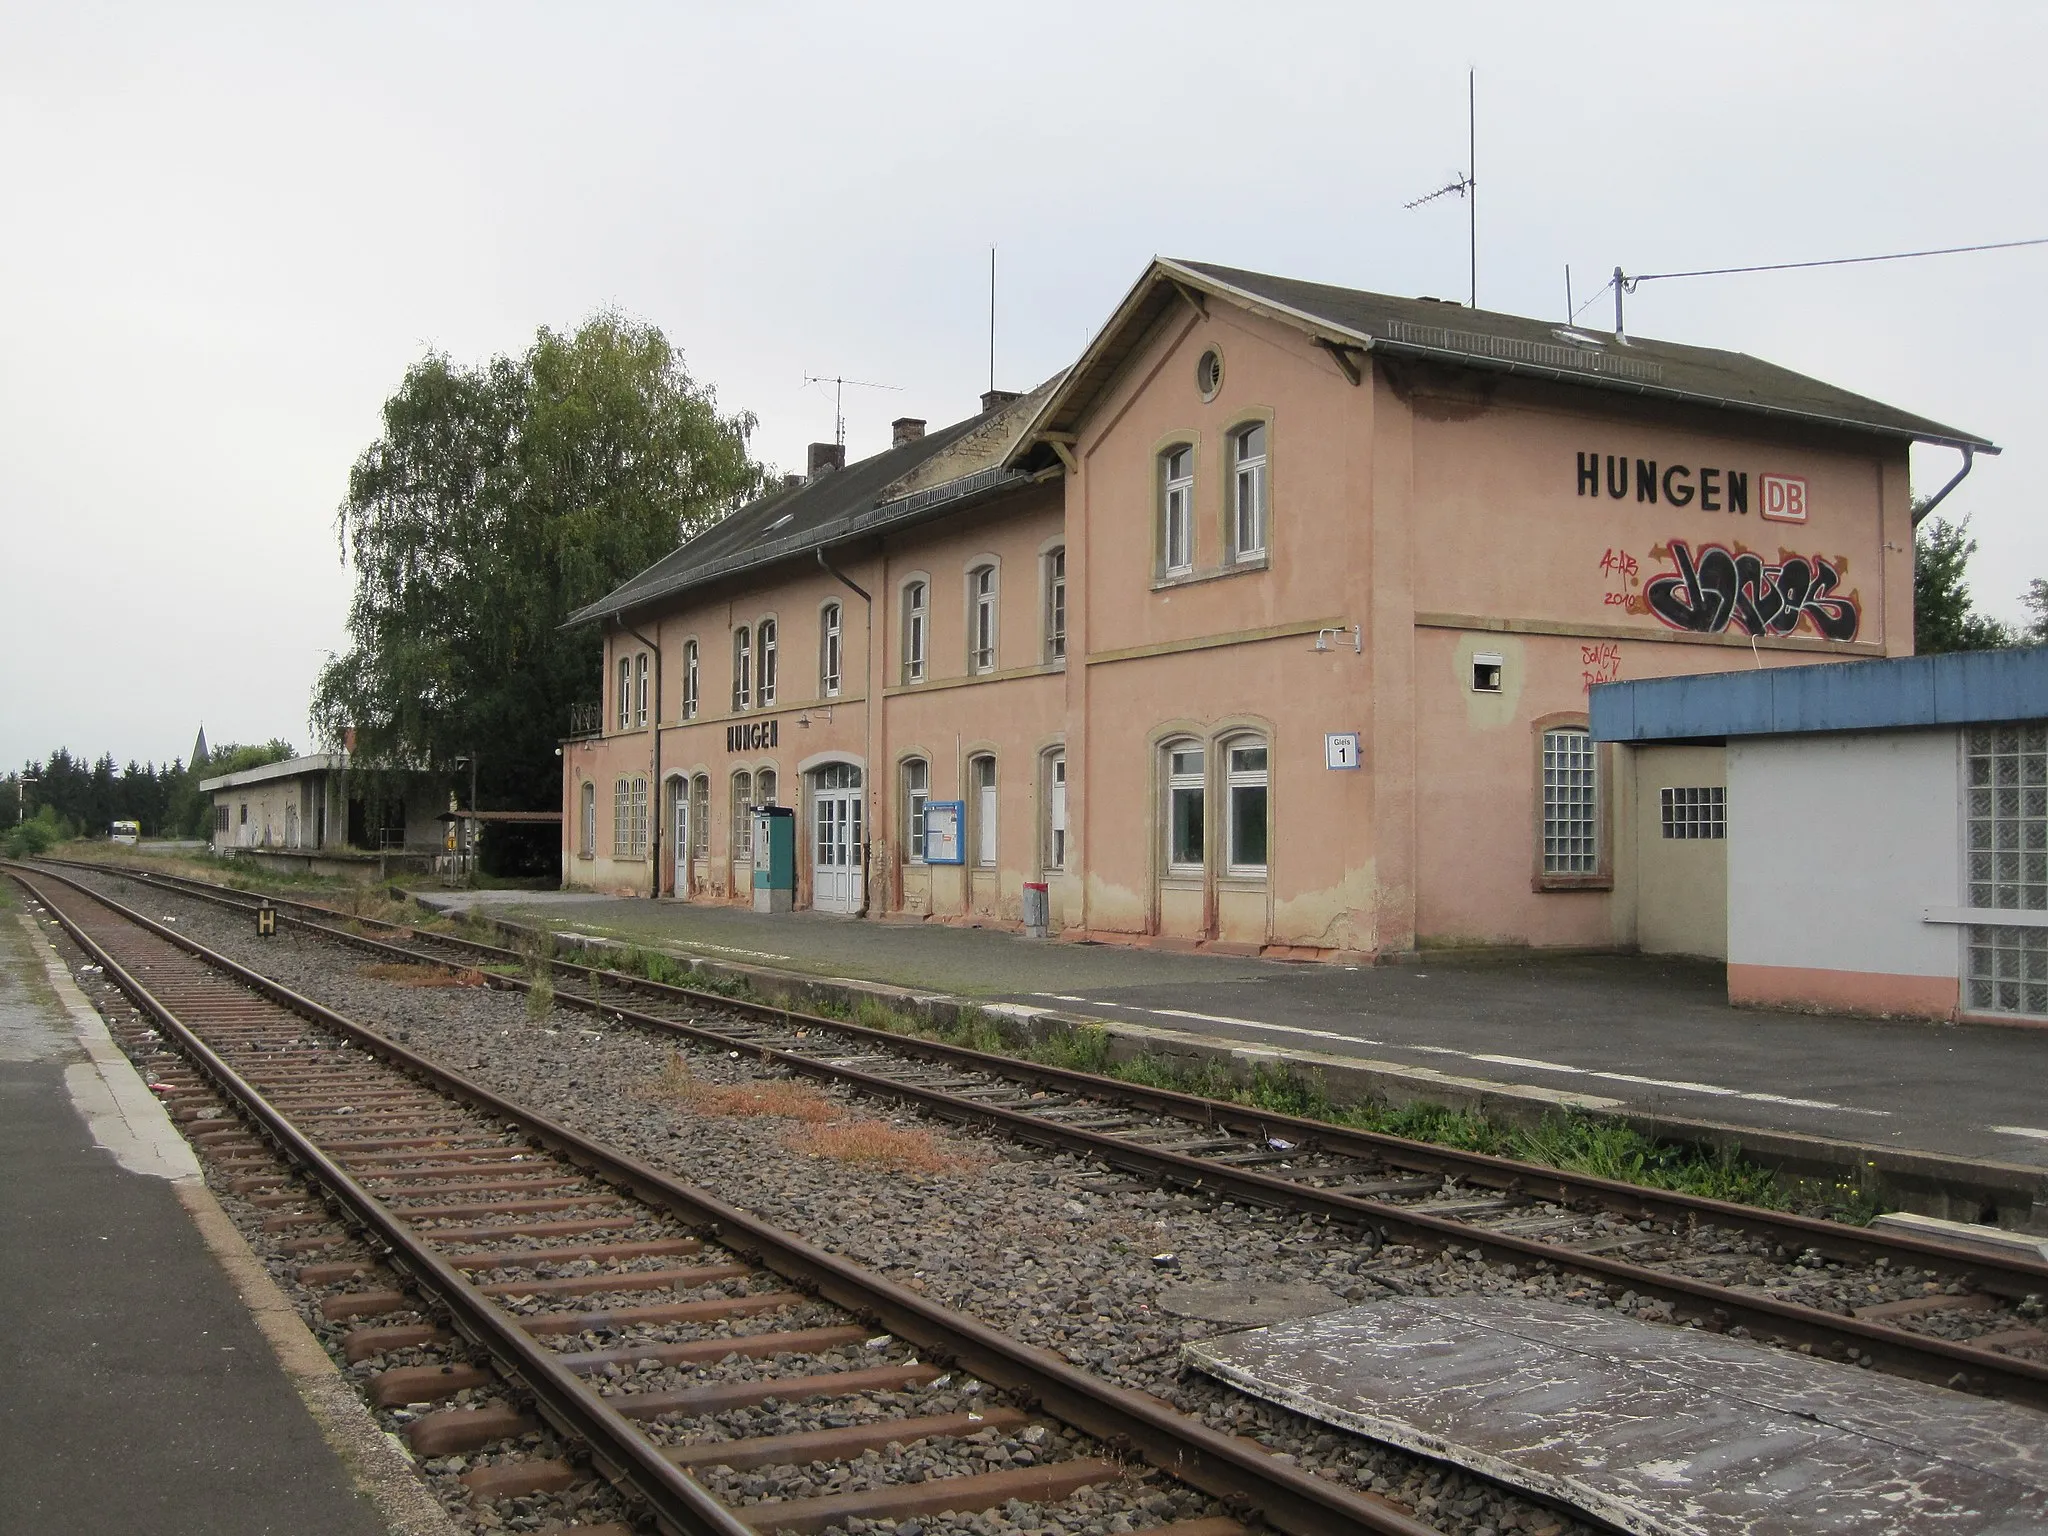 Photo showing: Hungen station, Hungen, Germany